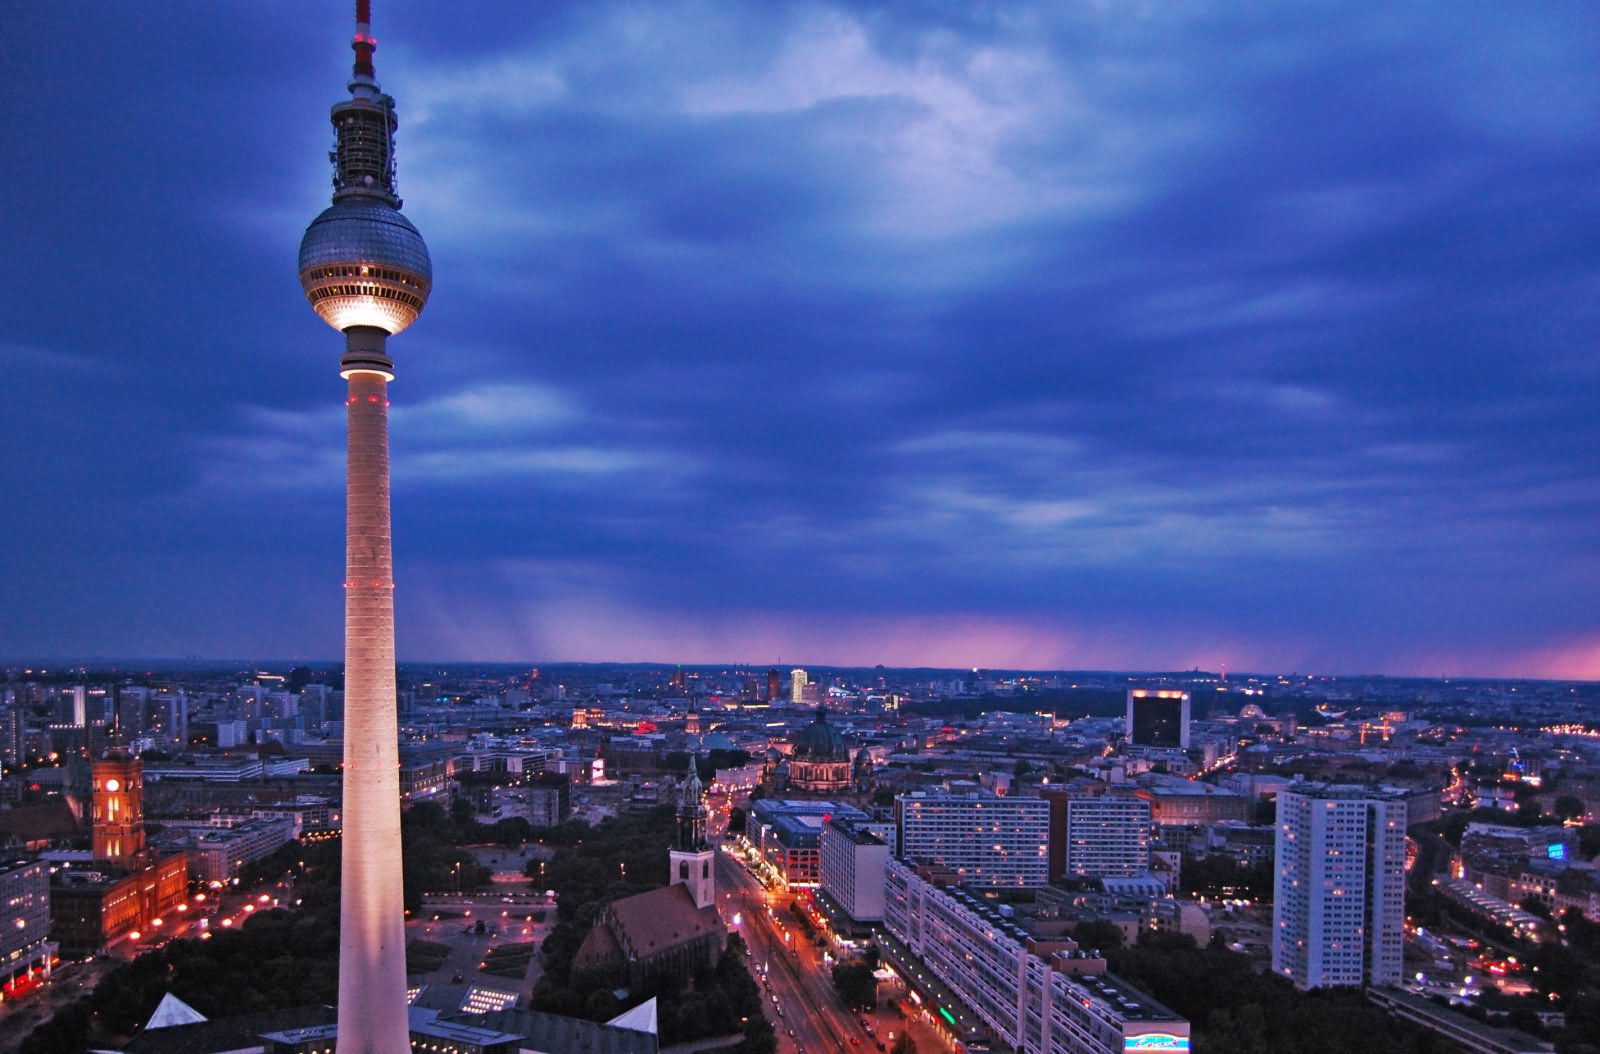 Beautiful Night Picture Of The Fernsehturm Tower And Berlin City